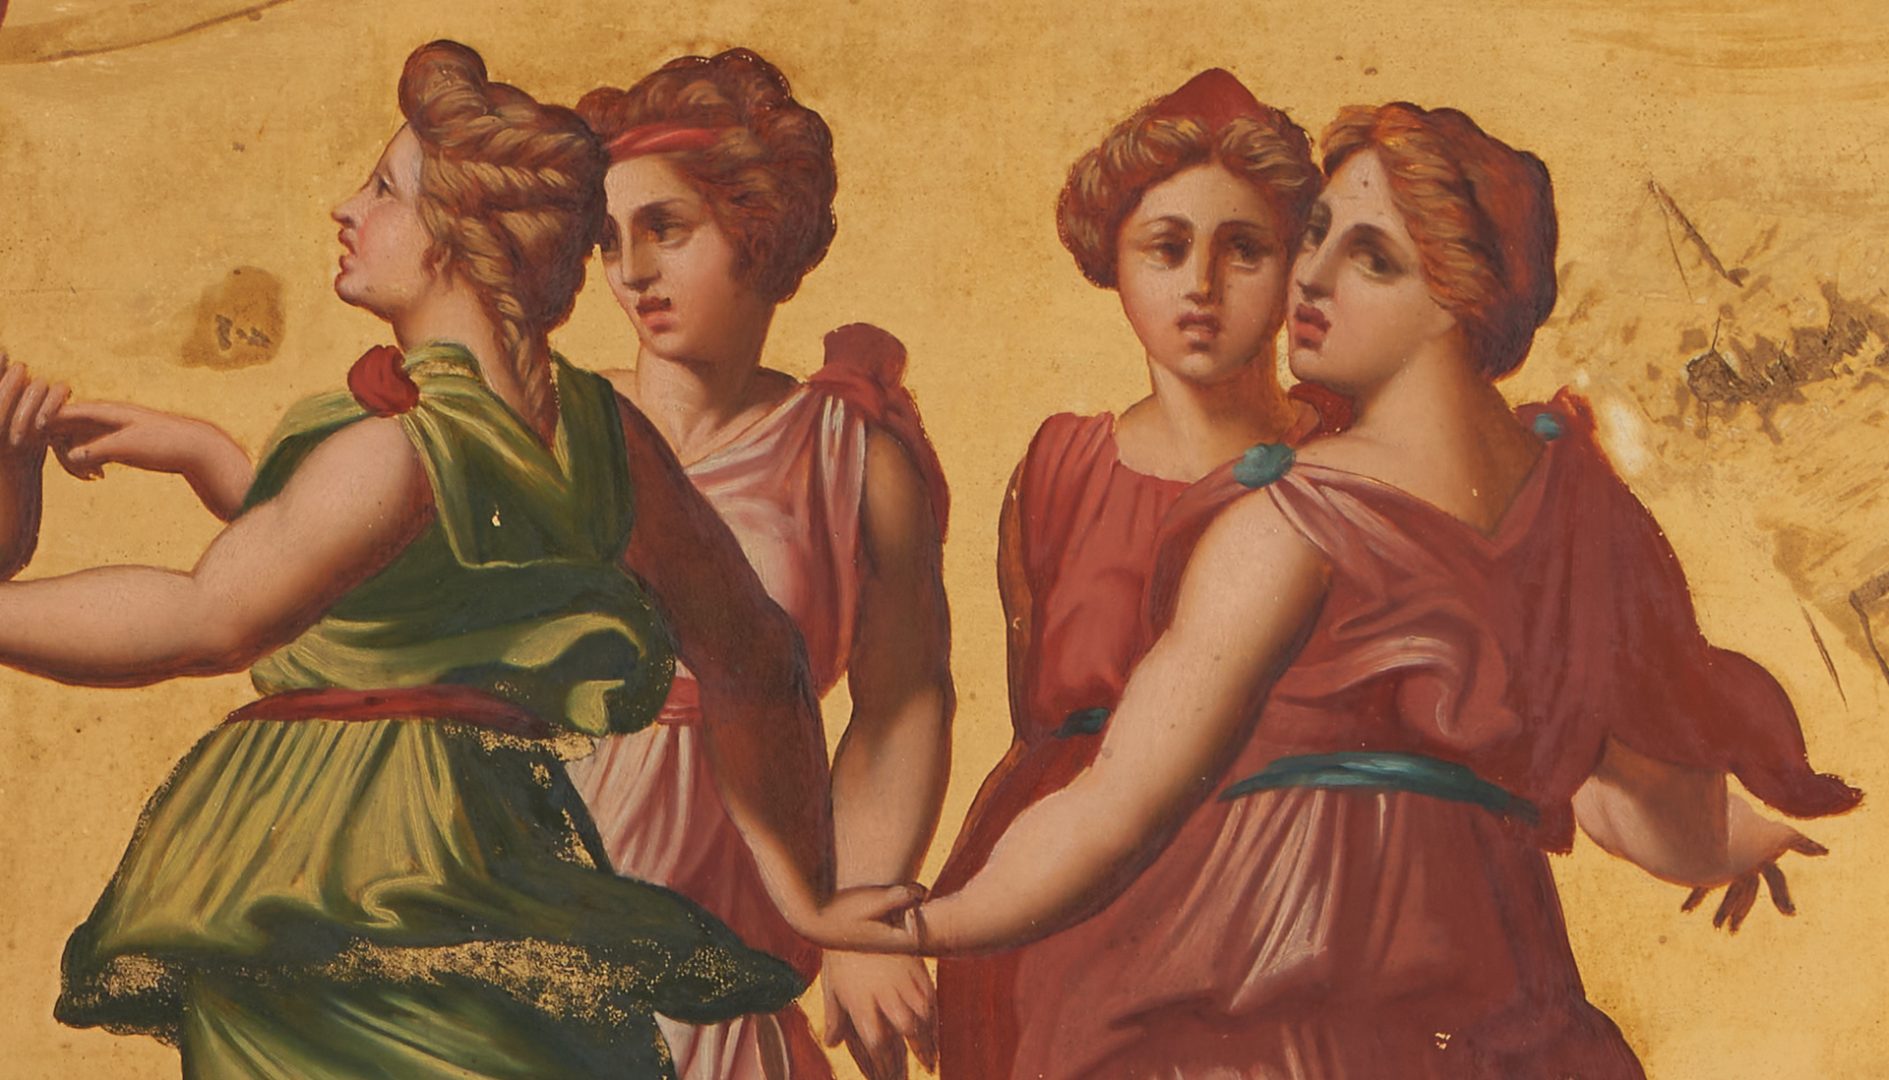 Lot 137: After Baldassare Peruzzi Gilt Panel, "Apollo Dancing with the Nine Muses"